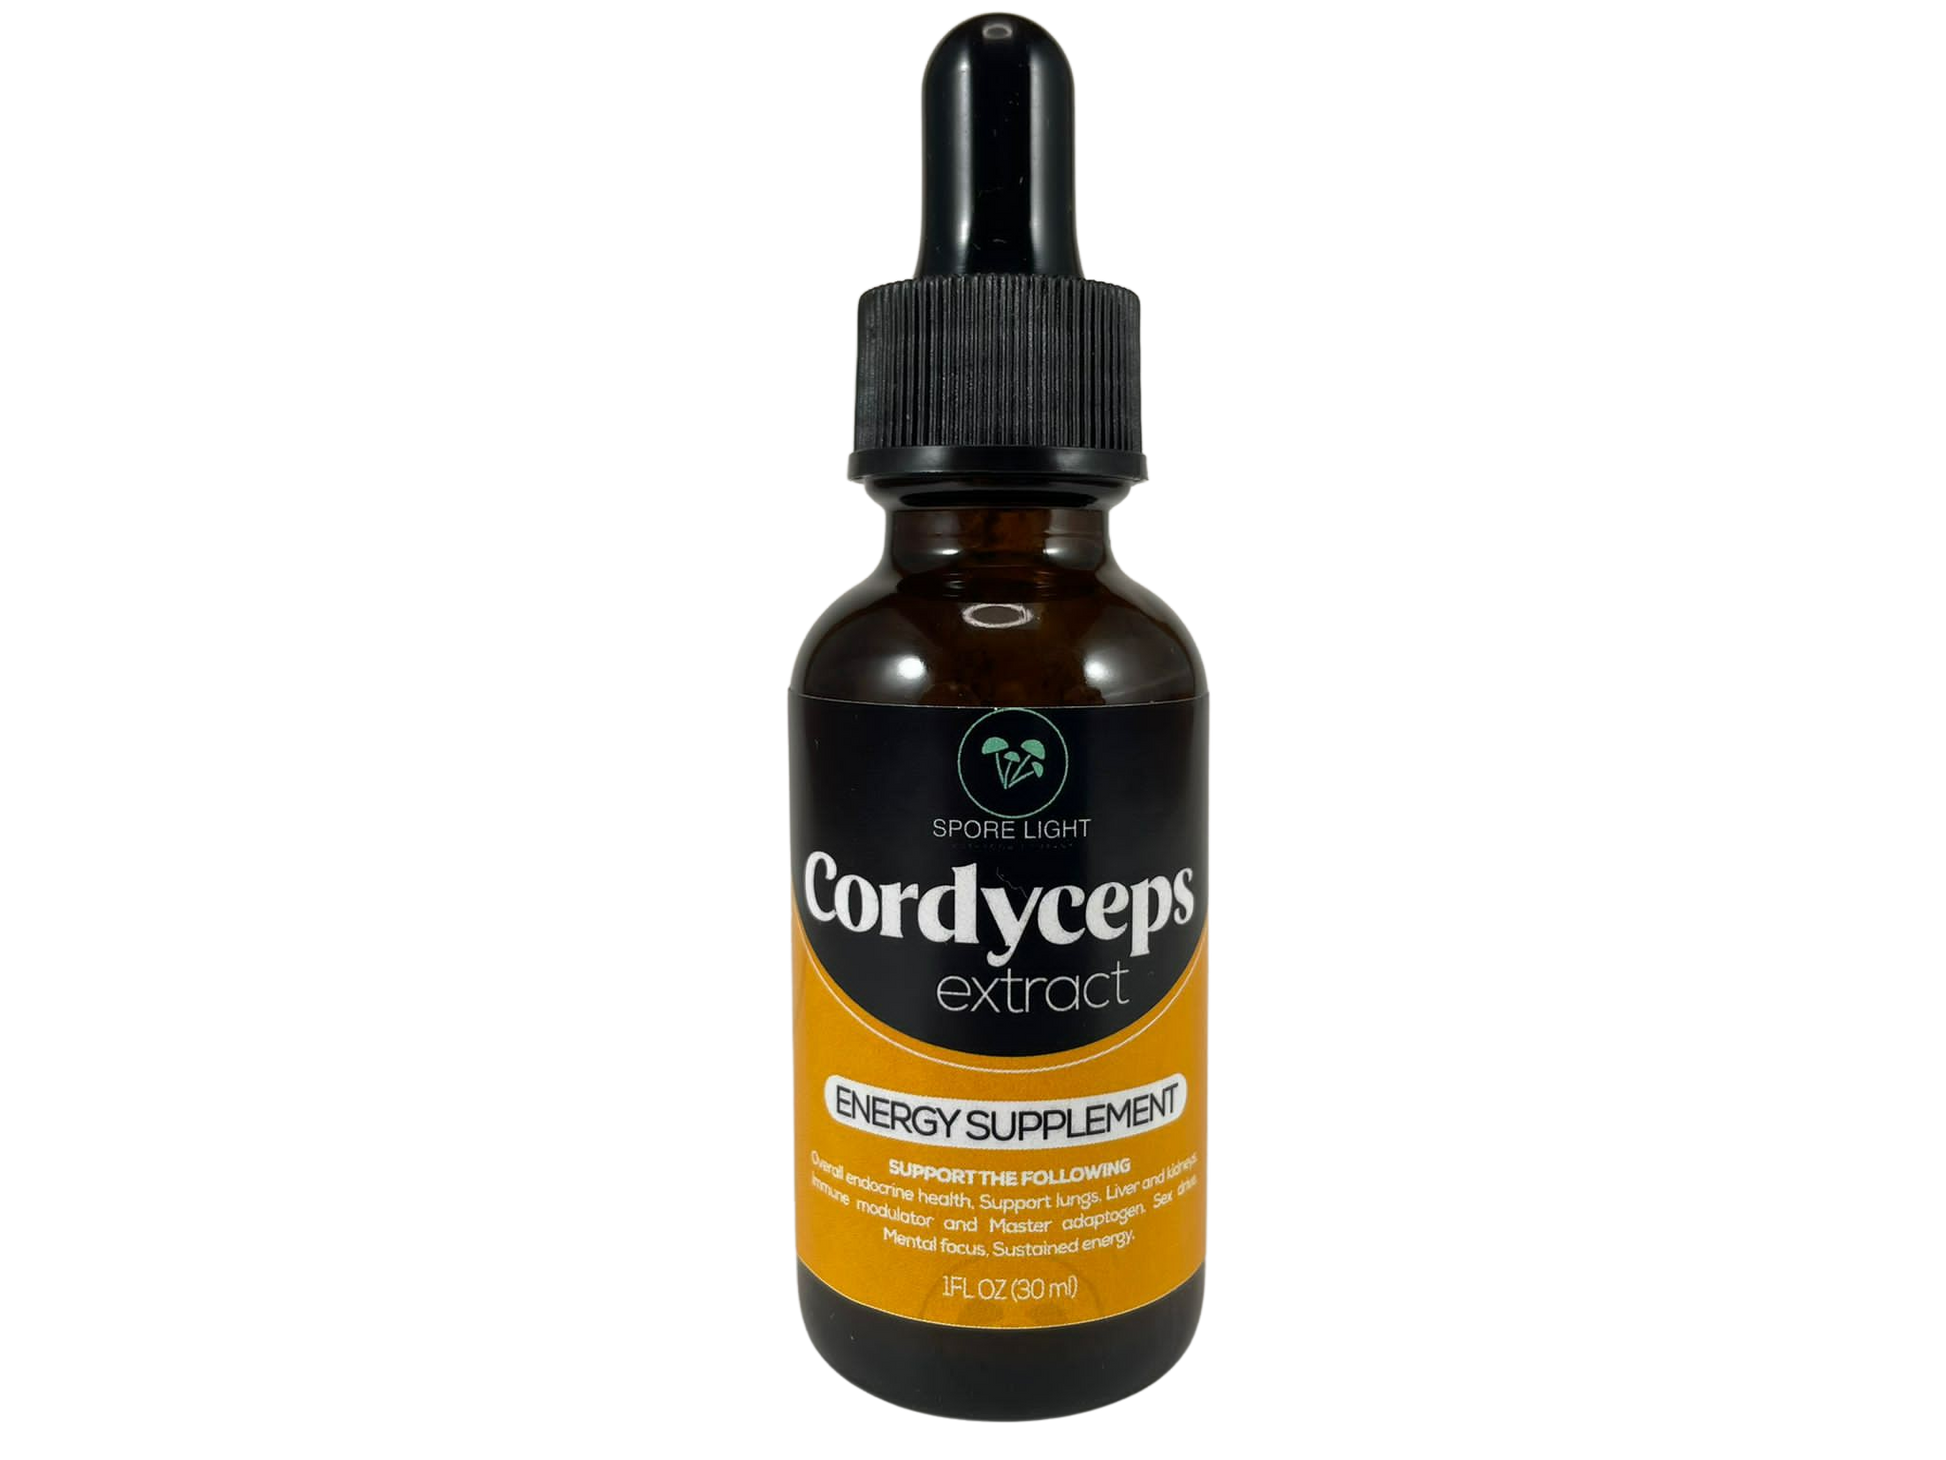 Spore Light Cordyceps extract, Energy Supplement front side of the bottle, 1FL OZ.